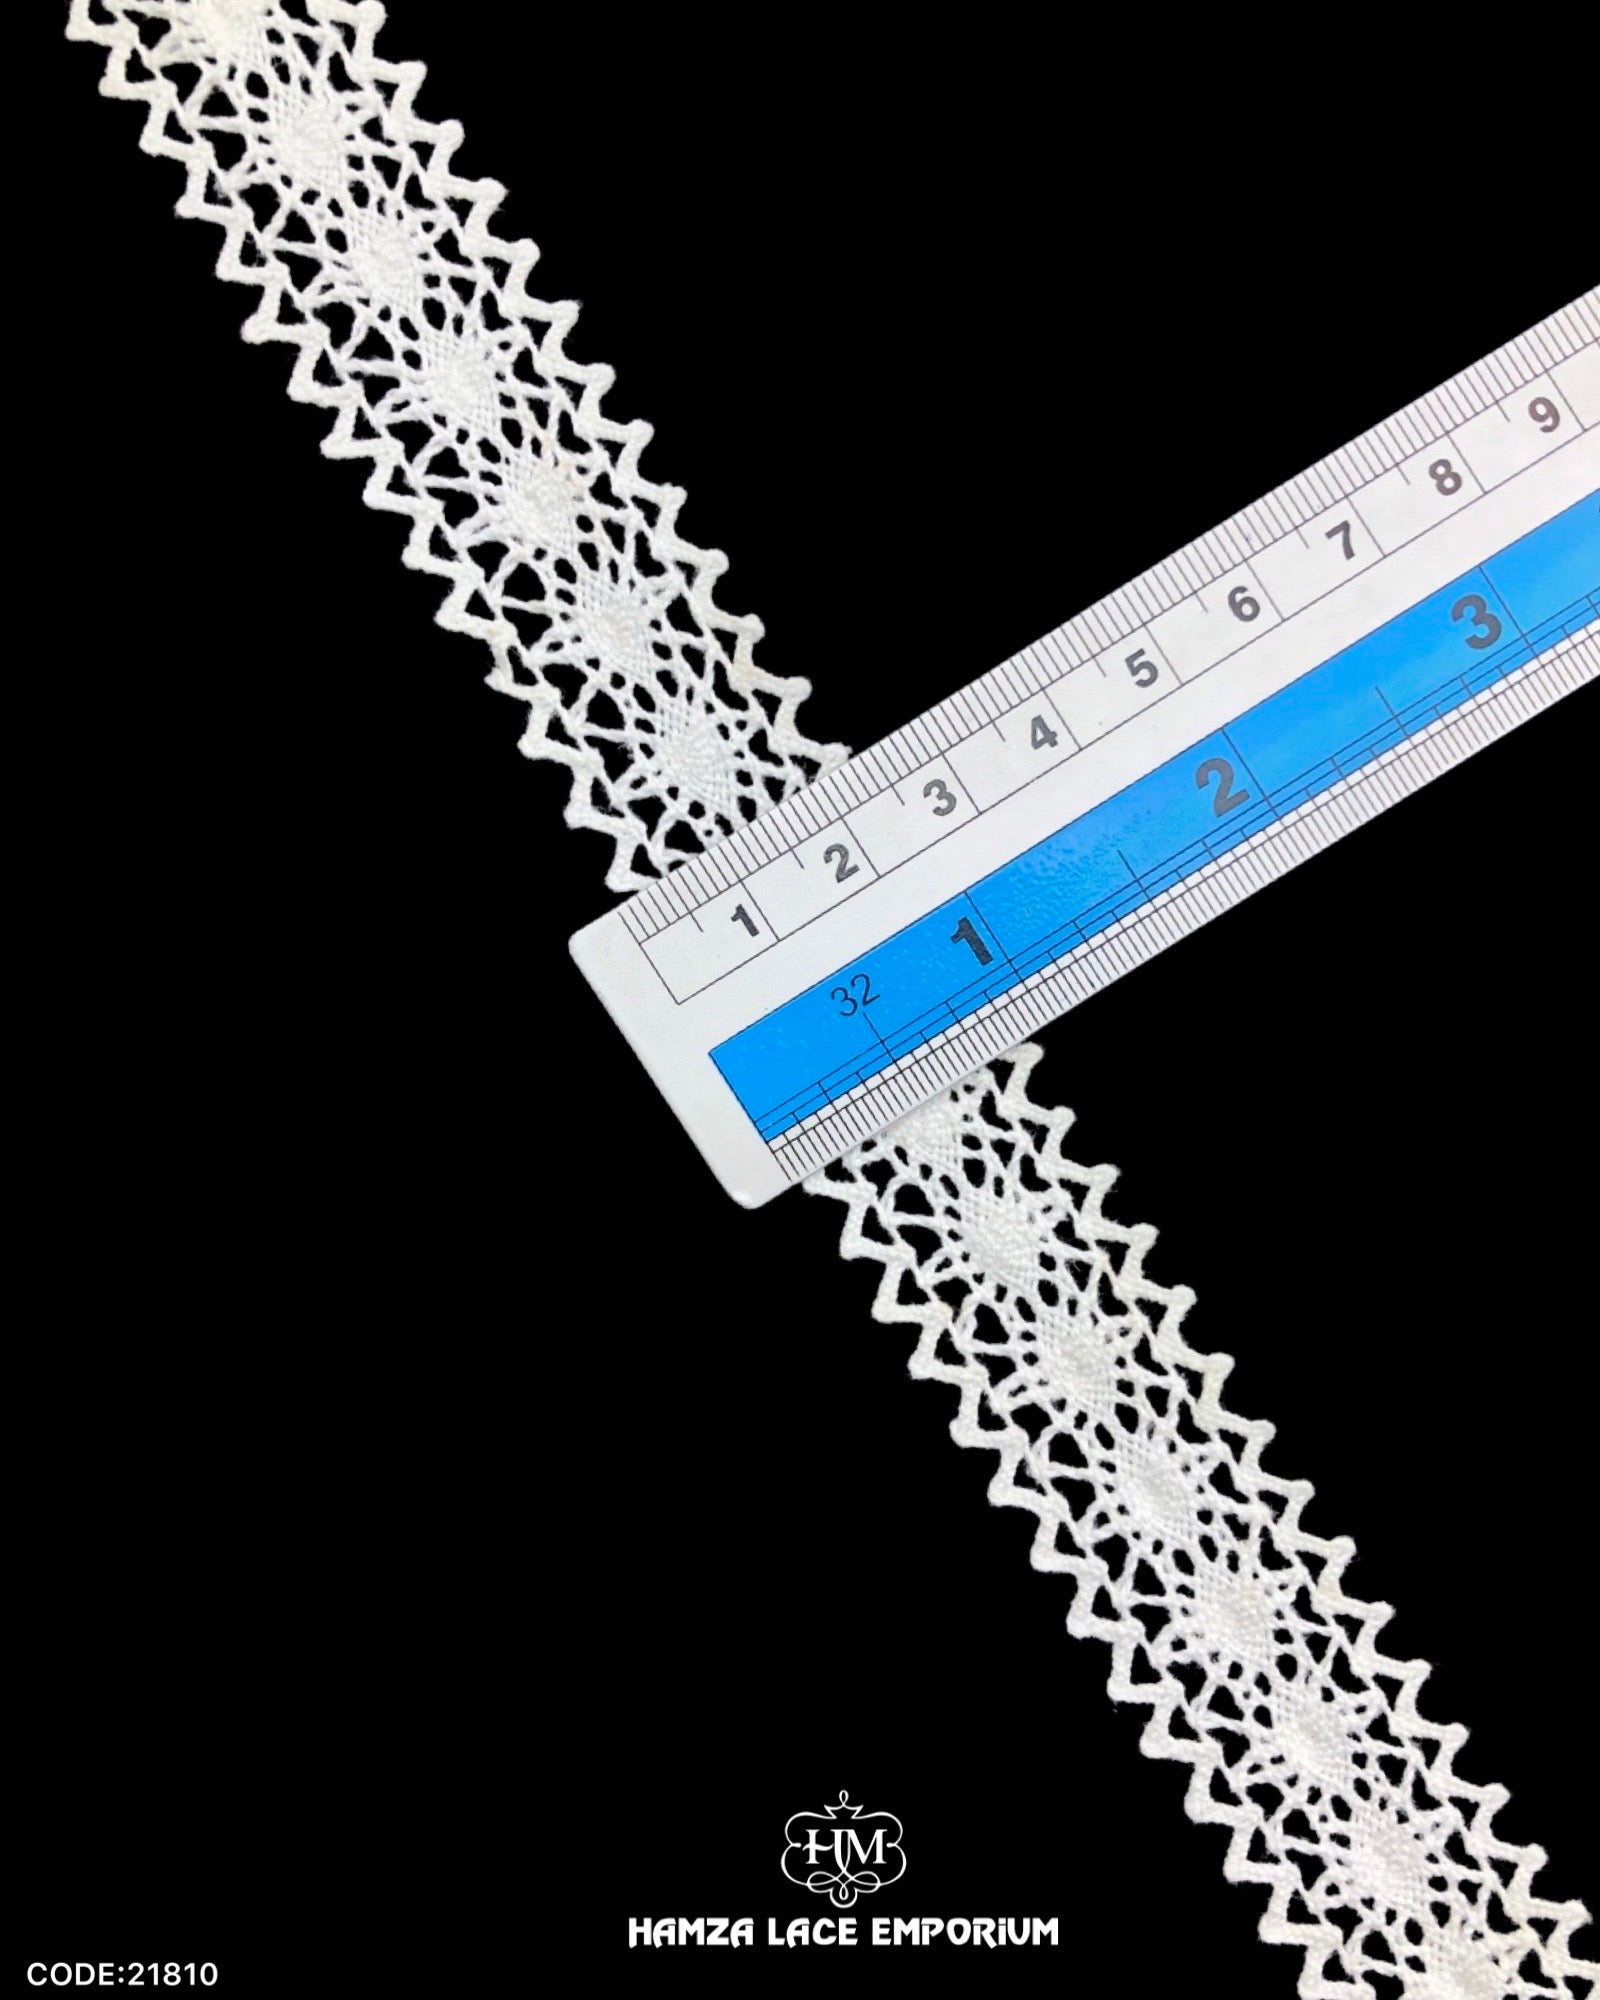 Size of the 'Center Filling Crochet Lace 21810' is displayed with the help of a ruler as '1' inch